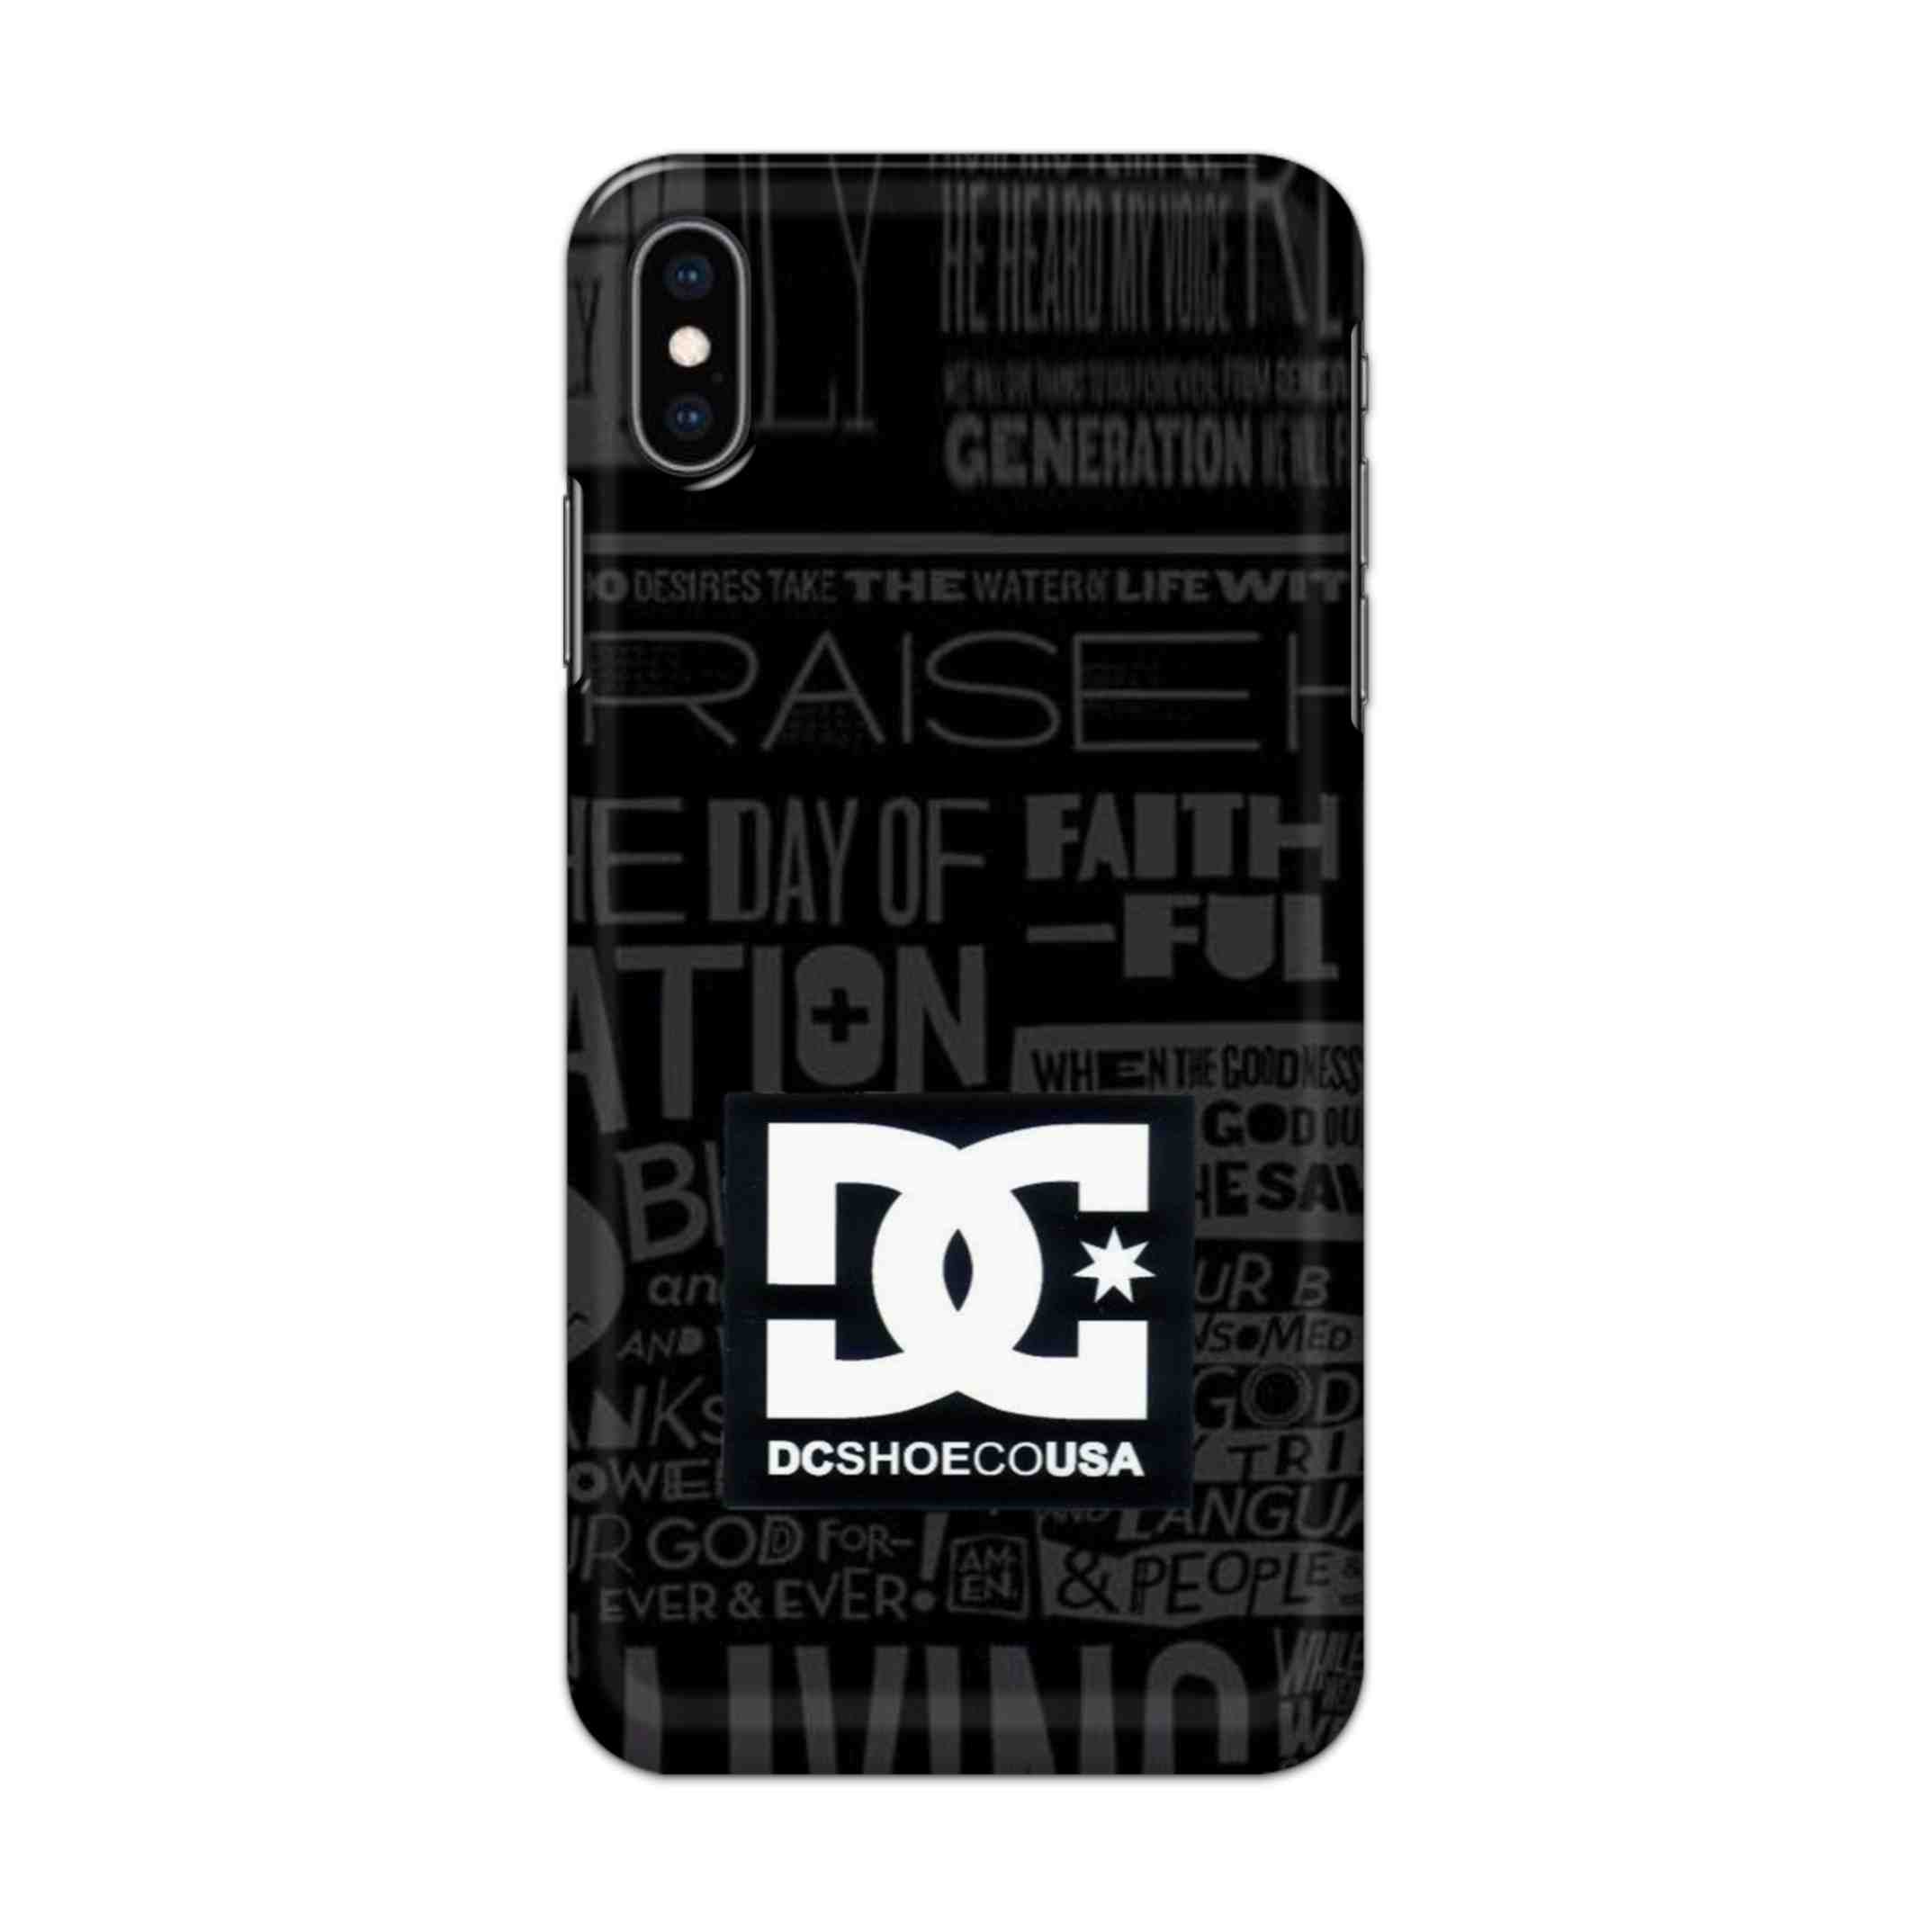 Buy Dc Shoecousa Hard Back Mobile Phone Case/Cover For iPhone XS MAX Online